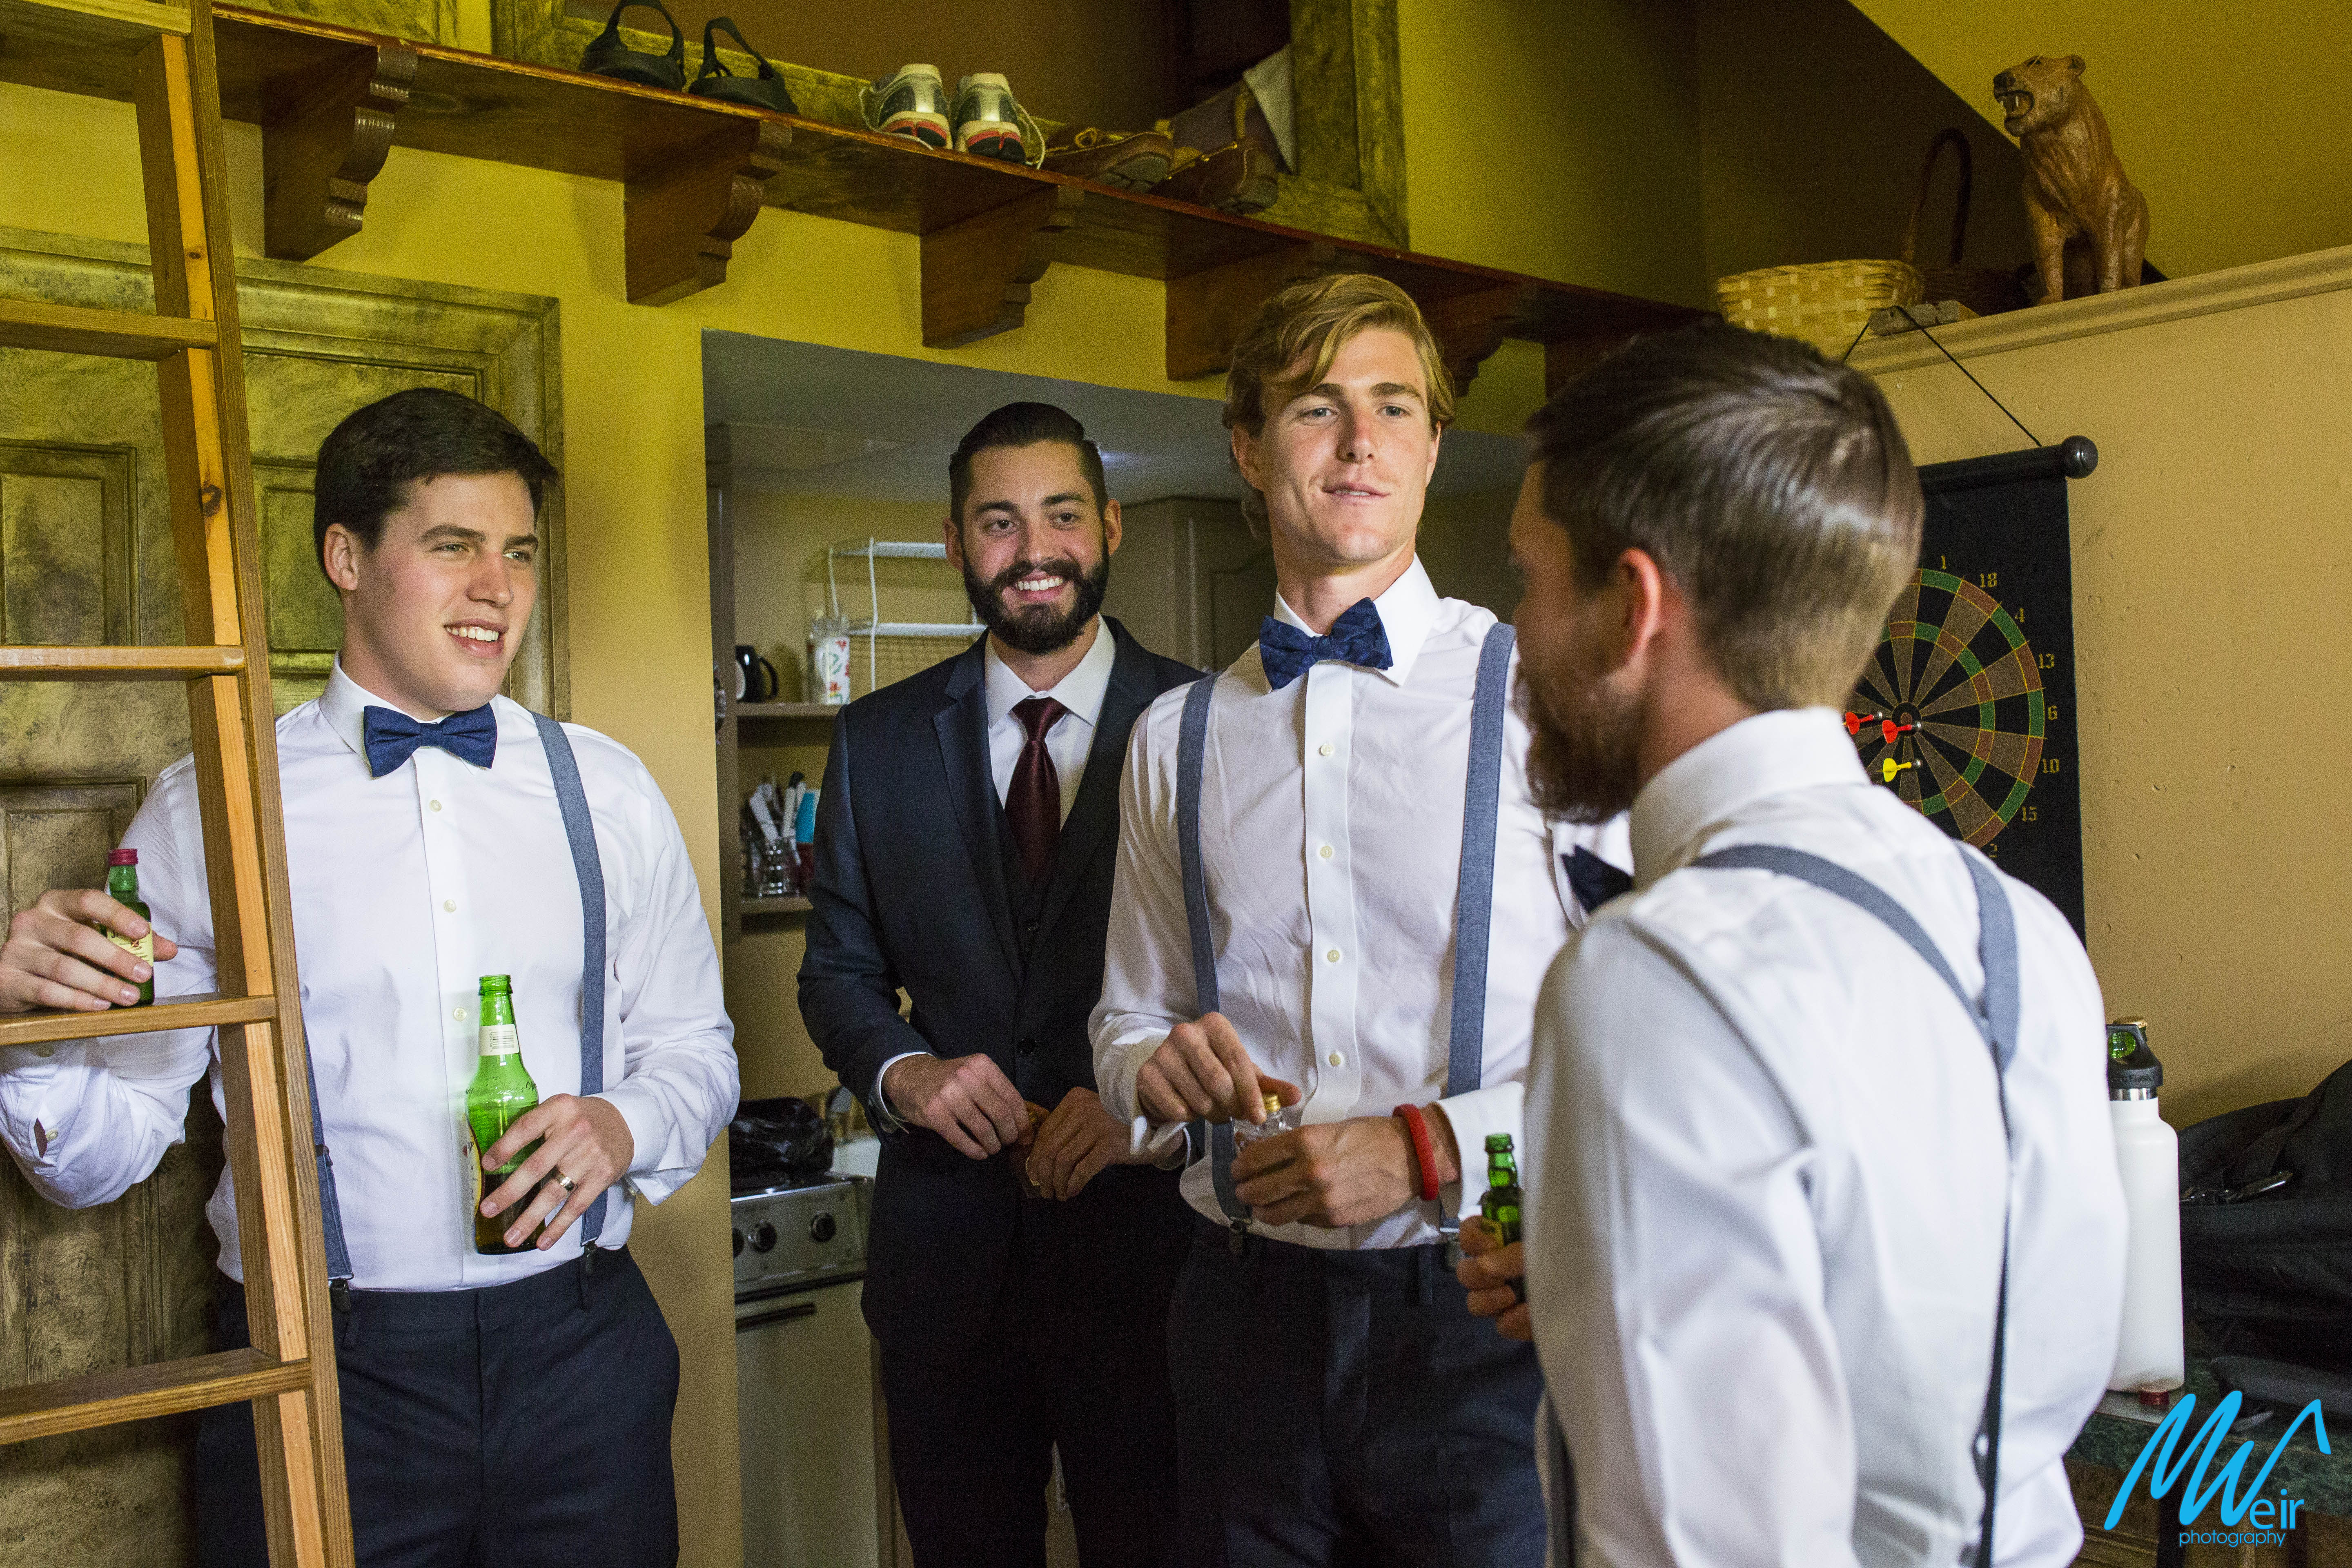 groomsmen party stand around laughing before wedding ceremony